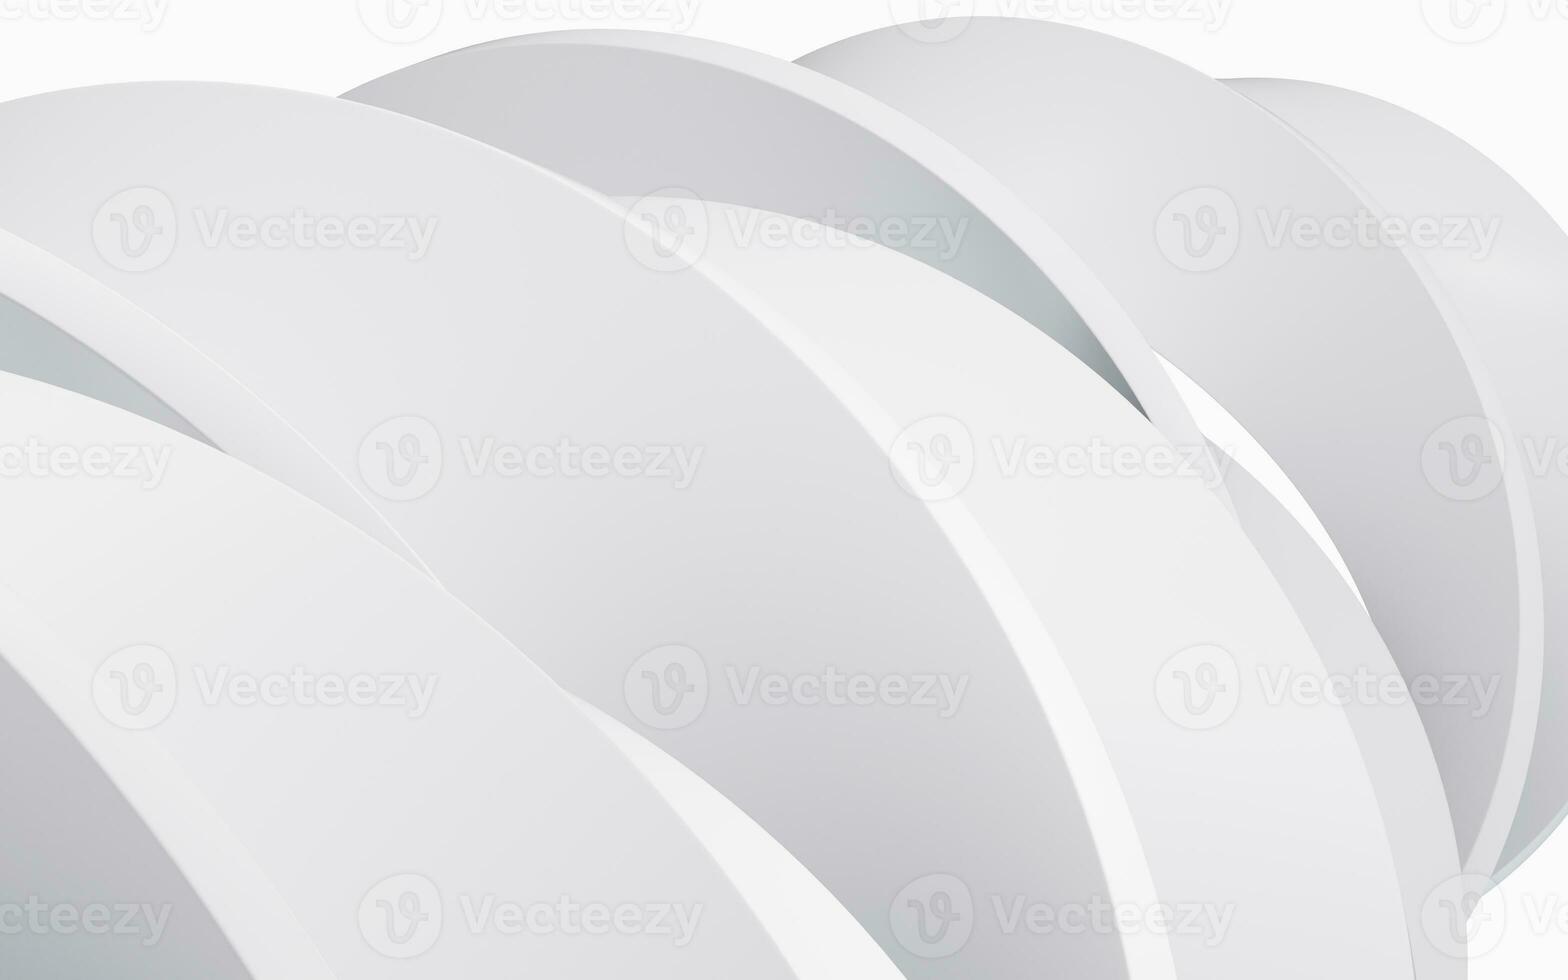 White geometric curve background, 3d rendering. photo